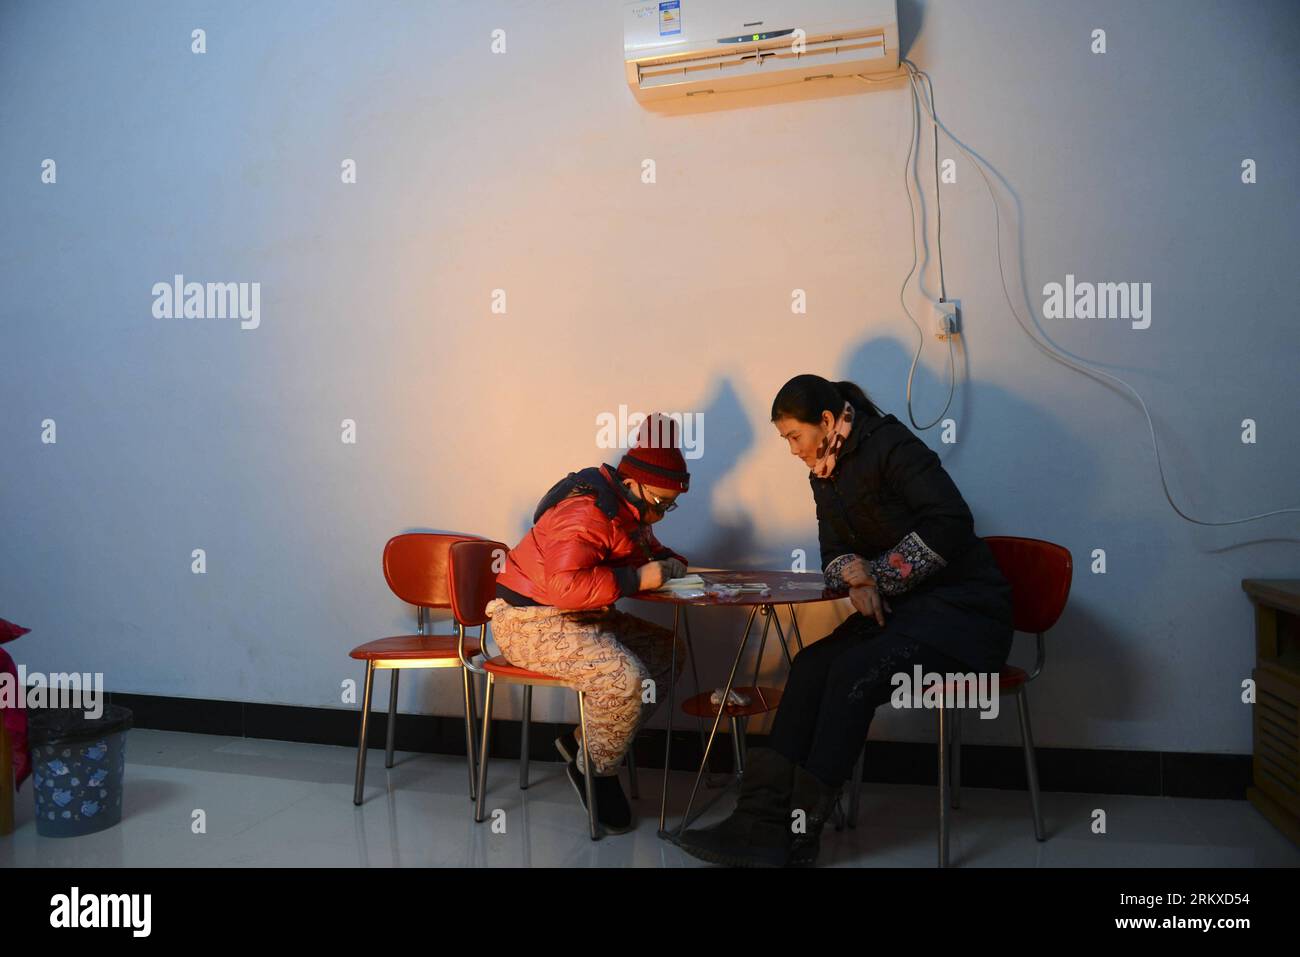 Bildnummer: 58948573  Datum: 19.12.2012  Copyright: imago/Xinhua A mother and her child Luo Chunming, who is suffering from leukemia, are seen at home in Zhoudang Township of Luoshan County, central China s Henan Province, Dec. 20, 2012. Luo was diagnosed with leukemia in 2011, and has spent over 600,000 yuan (96,300 U.S. dollars) for medical treatment. (Xinhua/Jin Liangkuai) (ry) CHINA-HENAN-LEUKEMIA-CHILDREN (CN) PUBLICATIONxNOTxINxCHN Gesellschaft krank Krankheit Leukämie Armut Kind x0x xrj 2012 quer     58948573 Date 19 12 2012 Copyright Imago XINHUA a Mother and her Child Luo Chunming Who Stock Photo